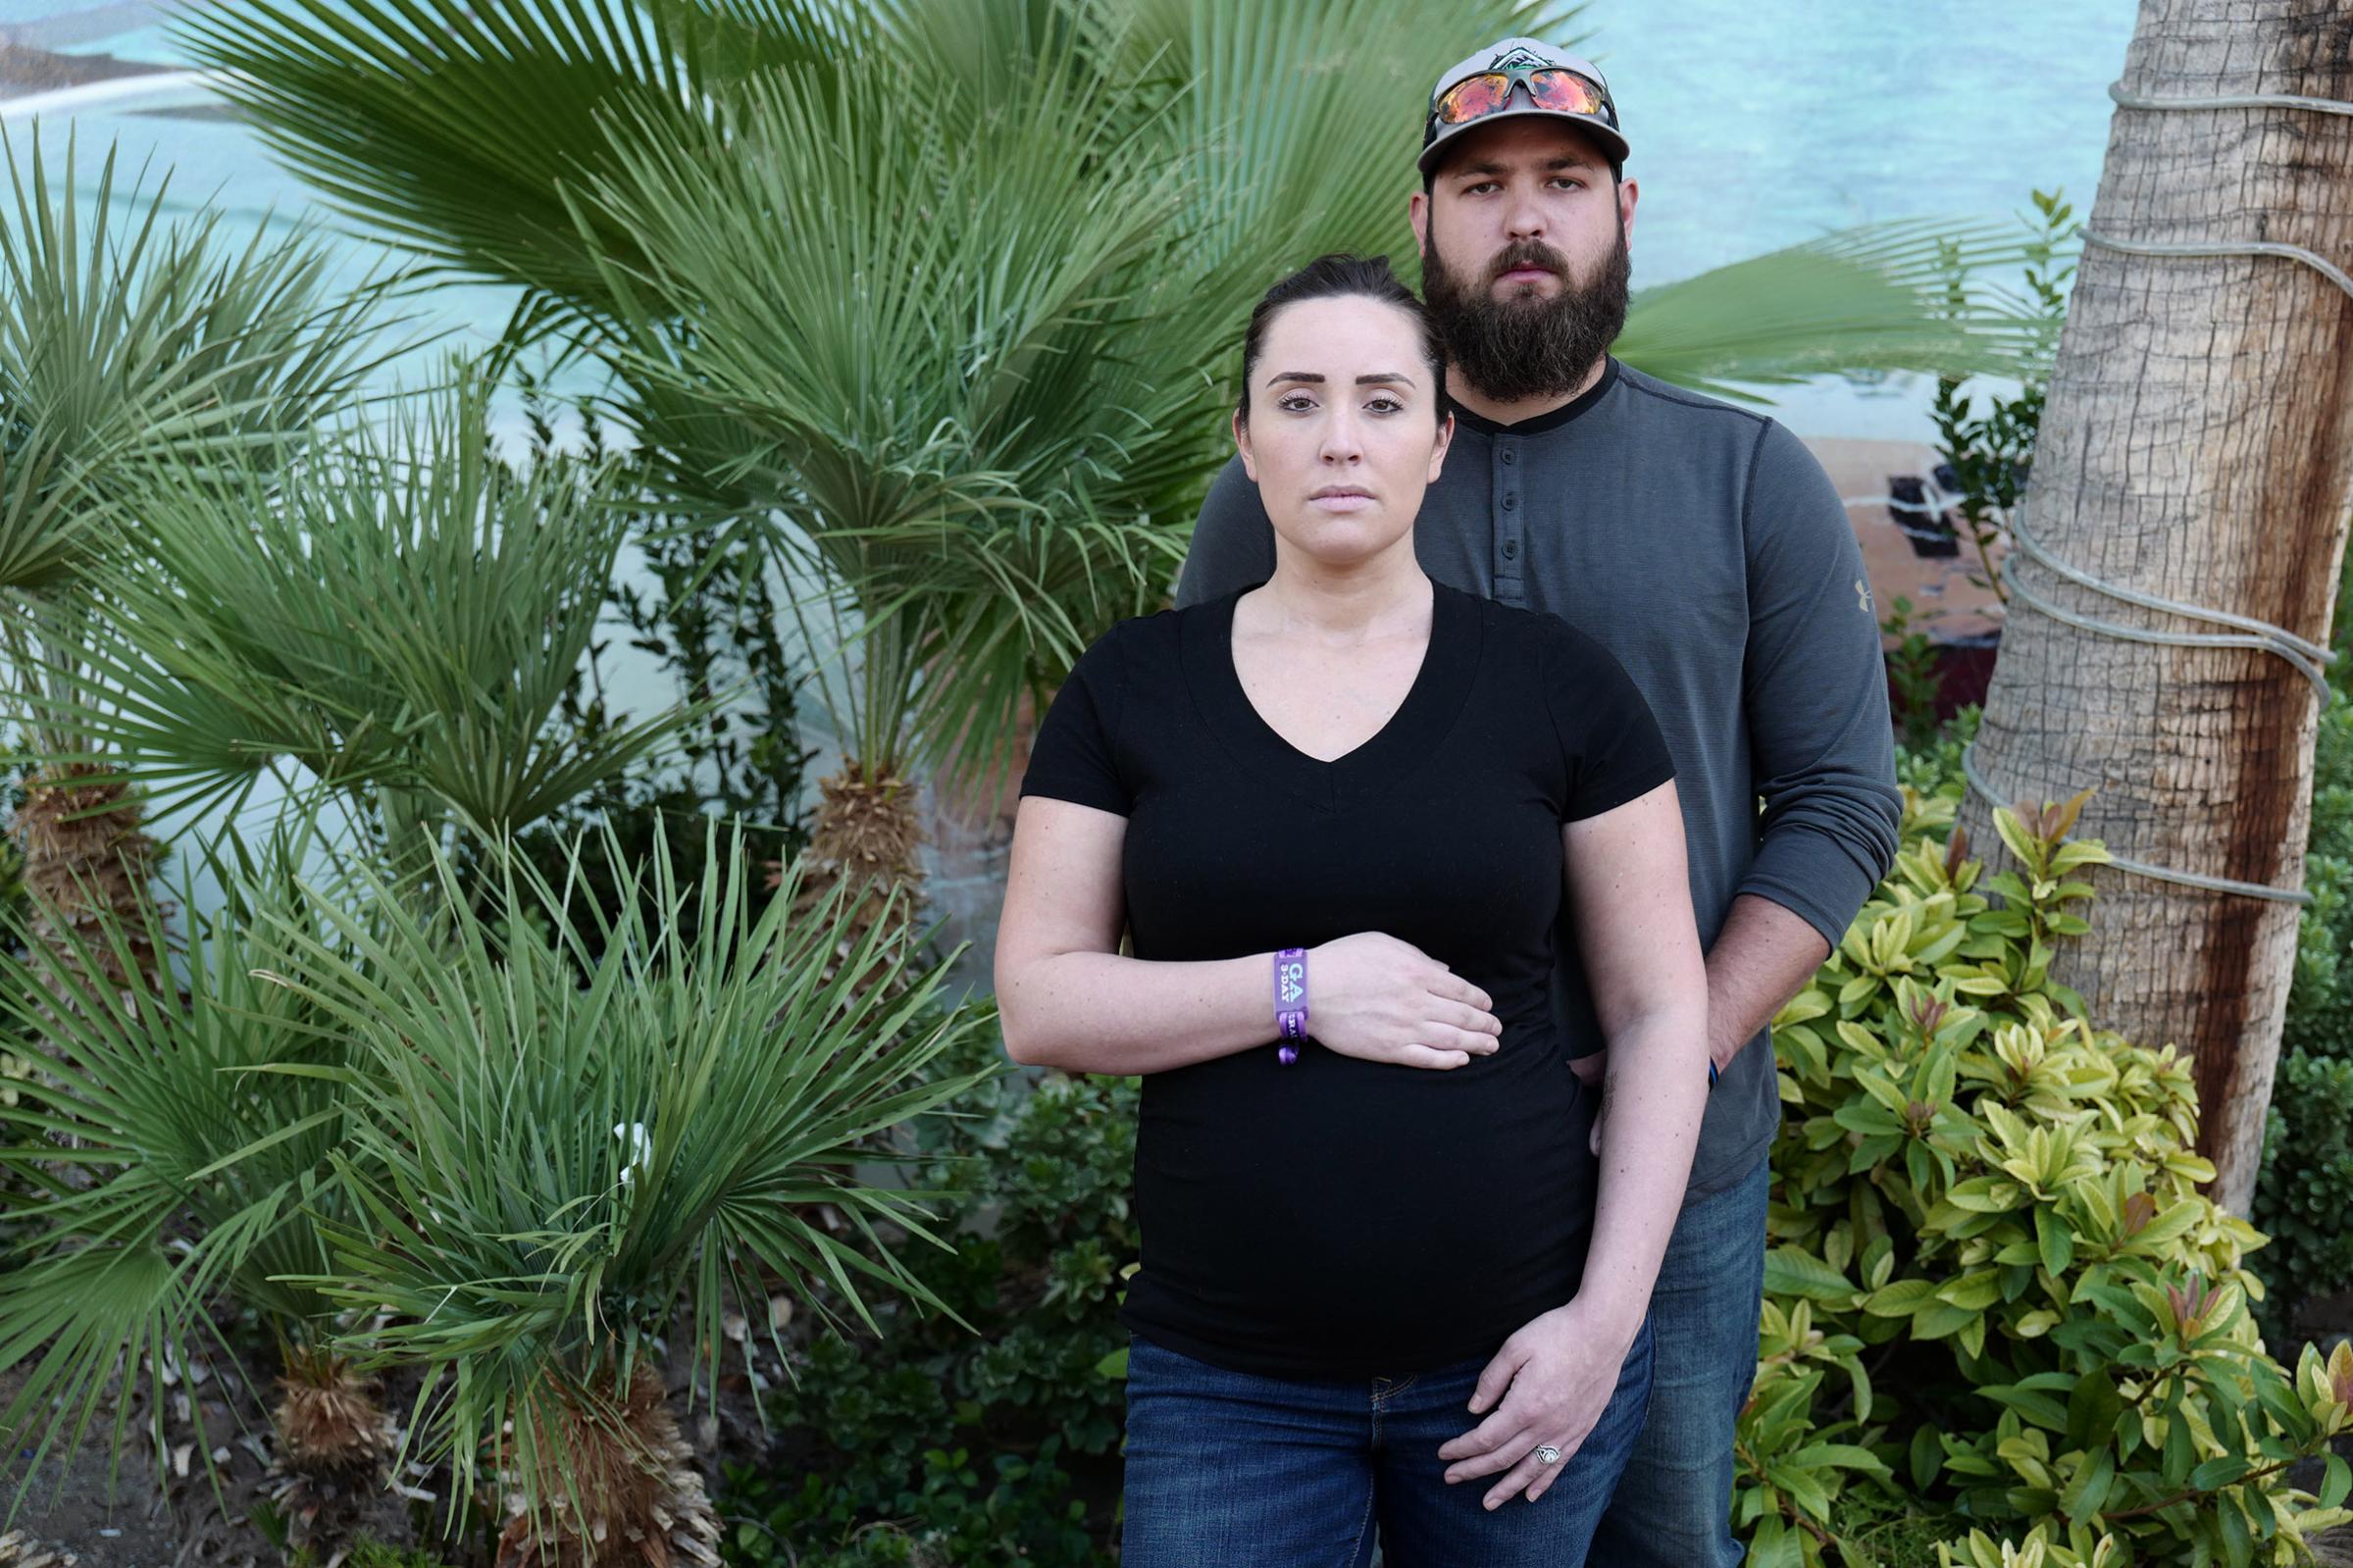 Kelsey Clark, age 25, (8 months pregnant), and husband Toby Clark, age 27, from Olympia, Washington, photographed in Las Vegas, Oct. 3, 2017.